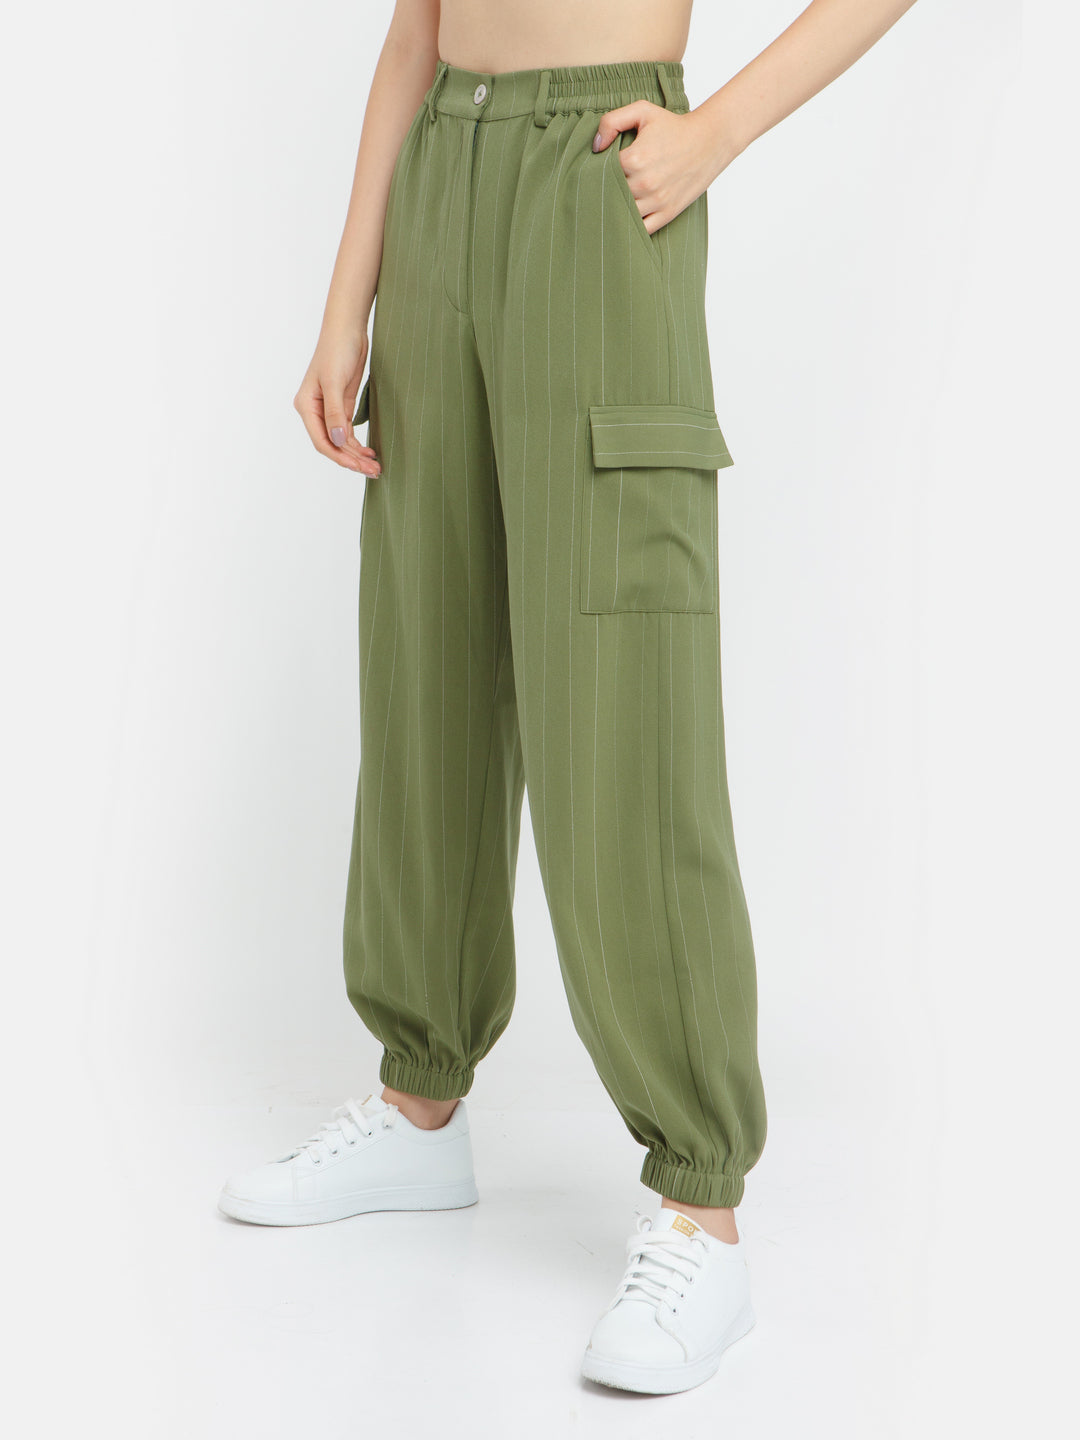 Buy Olive Striped Tapered Joggers For Women Online - Zink London